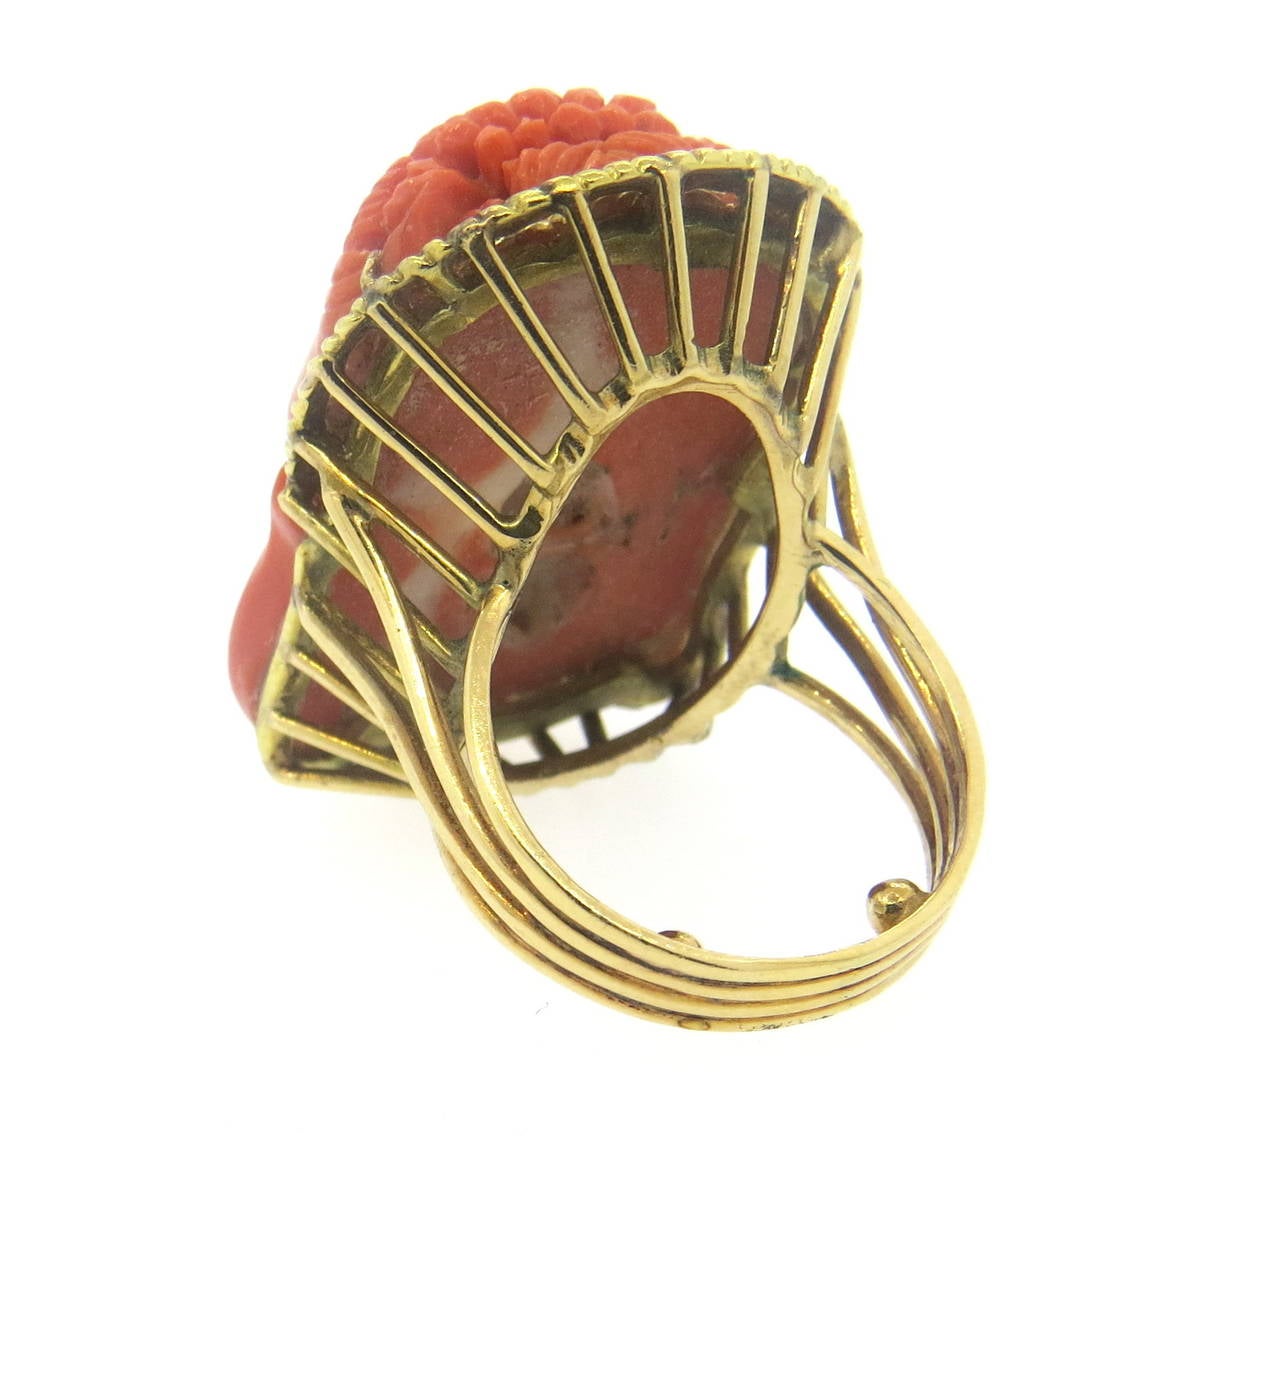 Large 18k gold ring, featuring carved coral gemstones. Ring is a size 7 (sizing balls can be removed to increase size) ring top is 36mm x 24mm. Weight of the piece - 23 grams